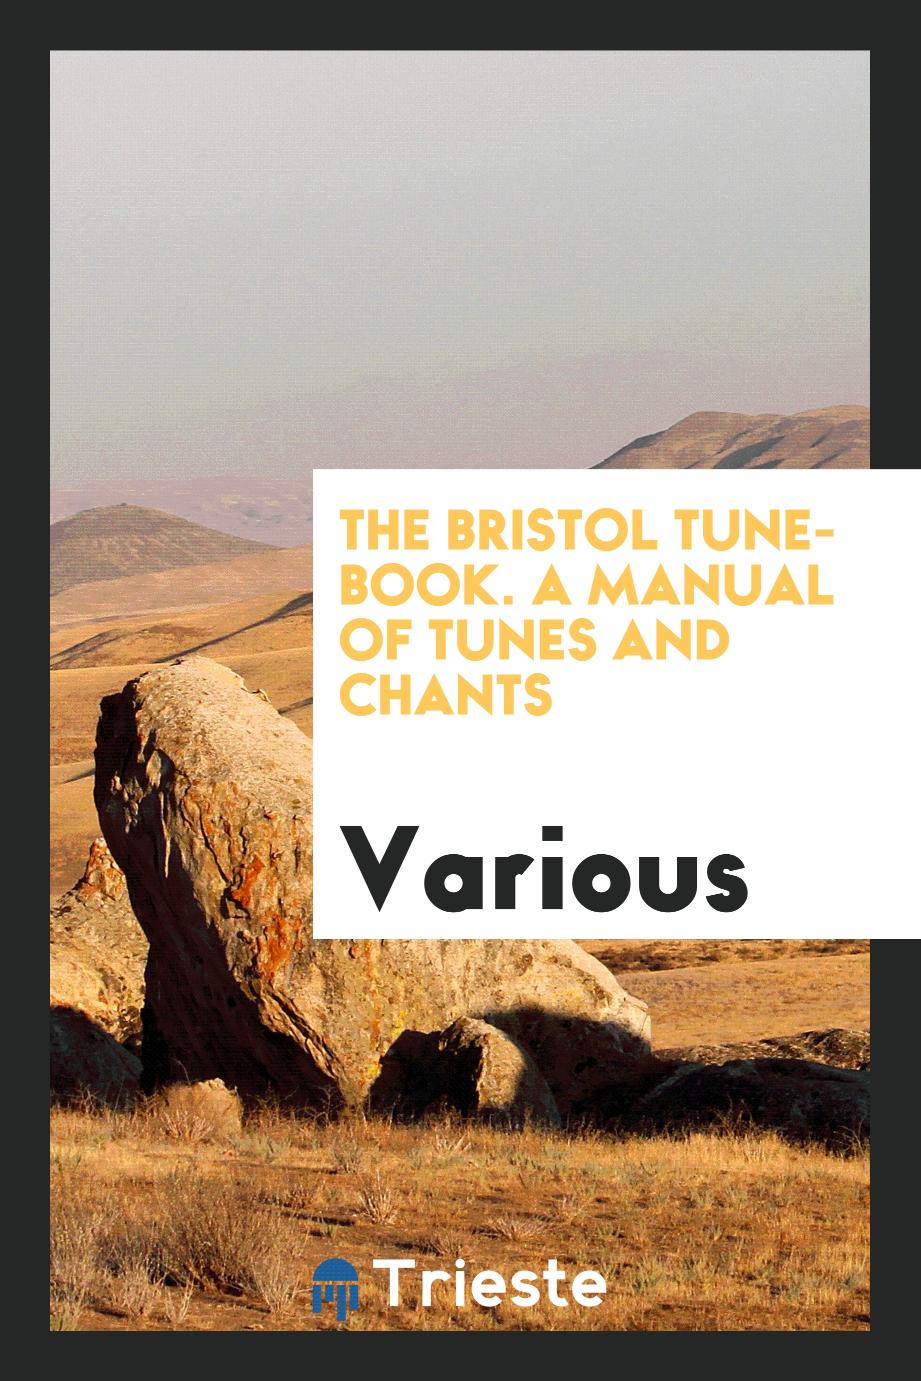 The Bristol Tune-book. A manual of tunes and chants